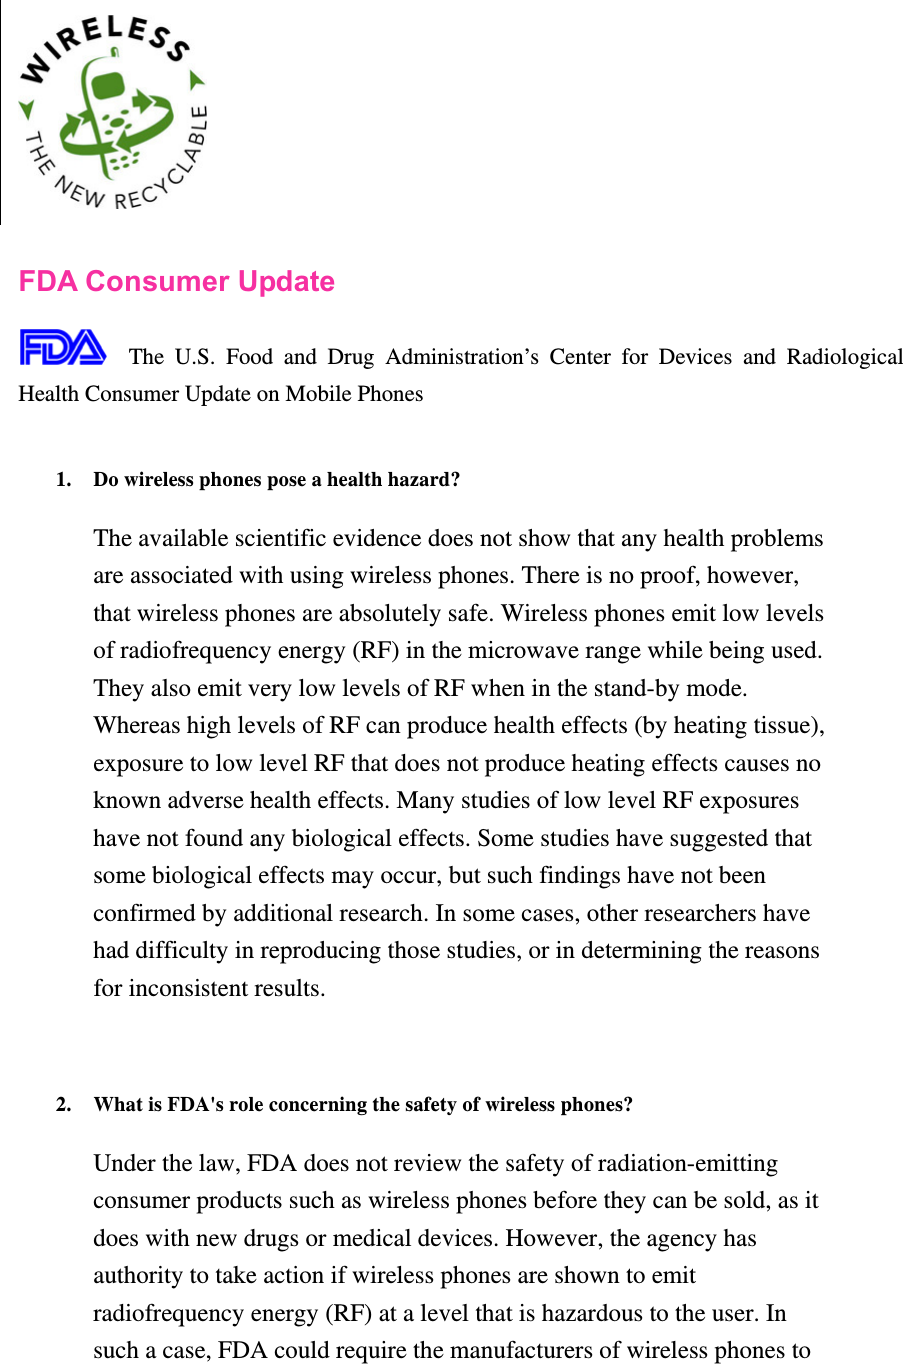    FDA Consumer Update  The U.S. Food and Drug Administration’s Center for Devices and Radiological Health Consumer Update on Mobile Phones  1. Do wireless phones pose a health hazard?   The available scientific evidence does not show that any health problems are associated with using wireless phones. There is no proof, however, that wireless phones are absolutely safe. Wireless phones emit low levels of radiofrequency energy (RF) in the microwave range while being used. They also emit very low levels of RF when in the stand-by mode. Whereas high levels of RF can produce health effects (by heating tissue), exposure to low level RF that does not produce heating effects causes no known adverse health effects. Many studies of low level RF exposures have not found any biological effects. Some studies have suggested that some biological effects may occur, but such findings have not been confirmed by additional research. In some cases, other researchers have had difficulty in reproducing those studies, or in determining the reasons for inconsistent results.   2. What is FDA&apos;s role concerning the safety of wireless phones?   Under the law, FDA does not review the safety of radiation-emitting consumer products such as wireless phones before they can be sold, as it does with new drugs or medical devices. However, the agency has authority to take action if wireless phones are shown to emit radiofrequency energy (RF) at a level that is hazardous to the user. In such a case, FDA could require the manufacturers of wireless phones to 